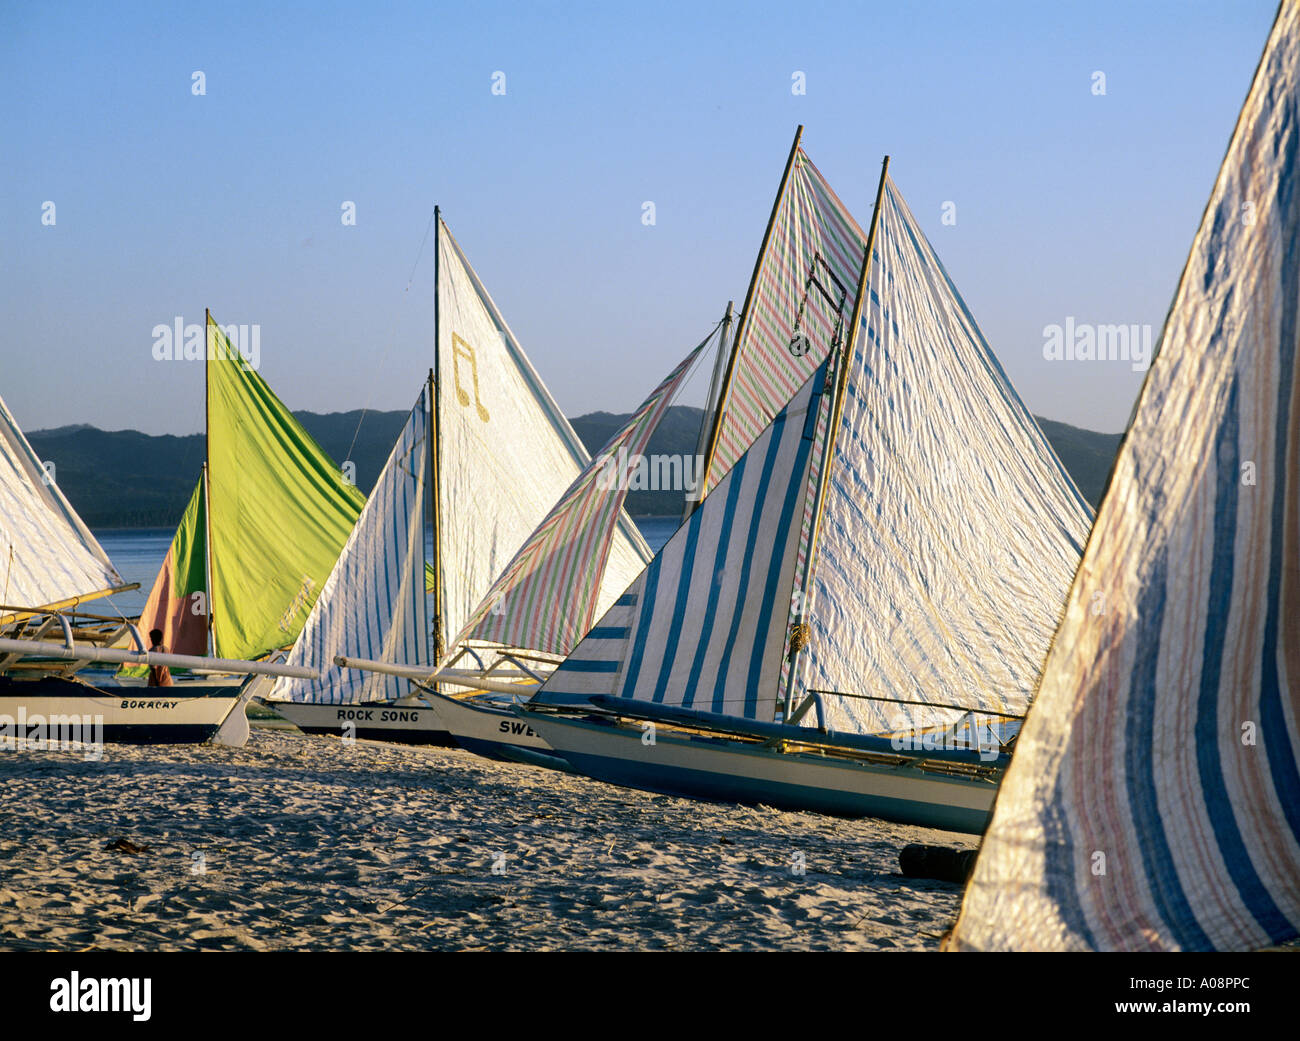 Yachts pulled up on the beach in Boracay, Philippines Stock Photo